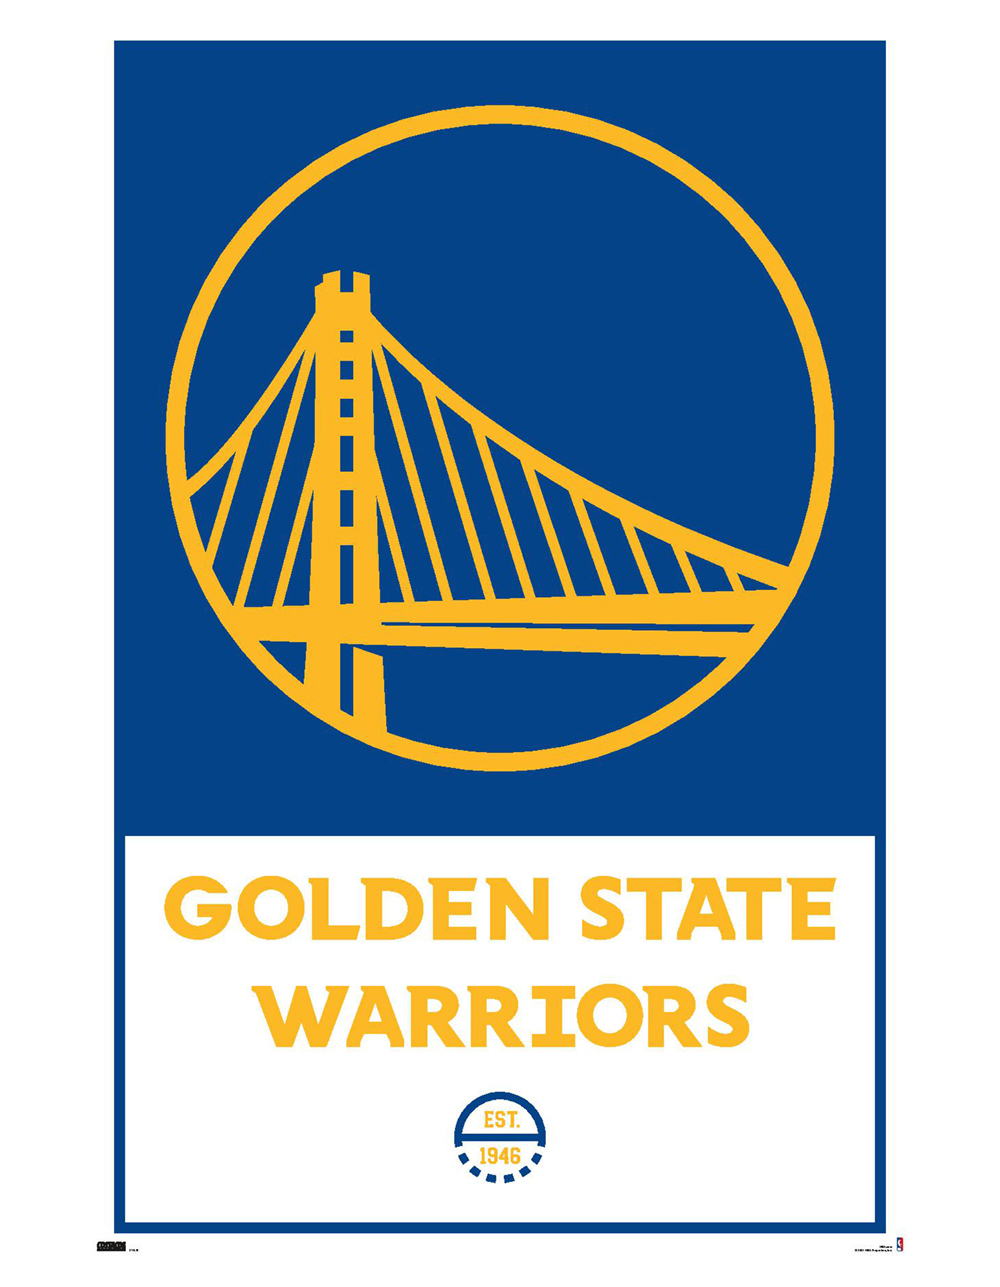 Urban Outfitters NBA Golden State Warriors Poster